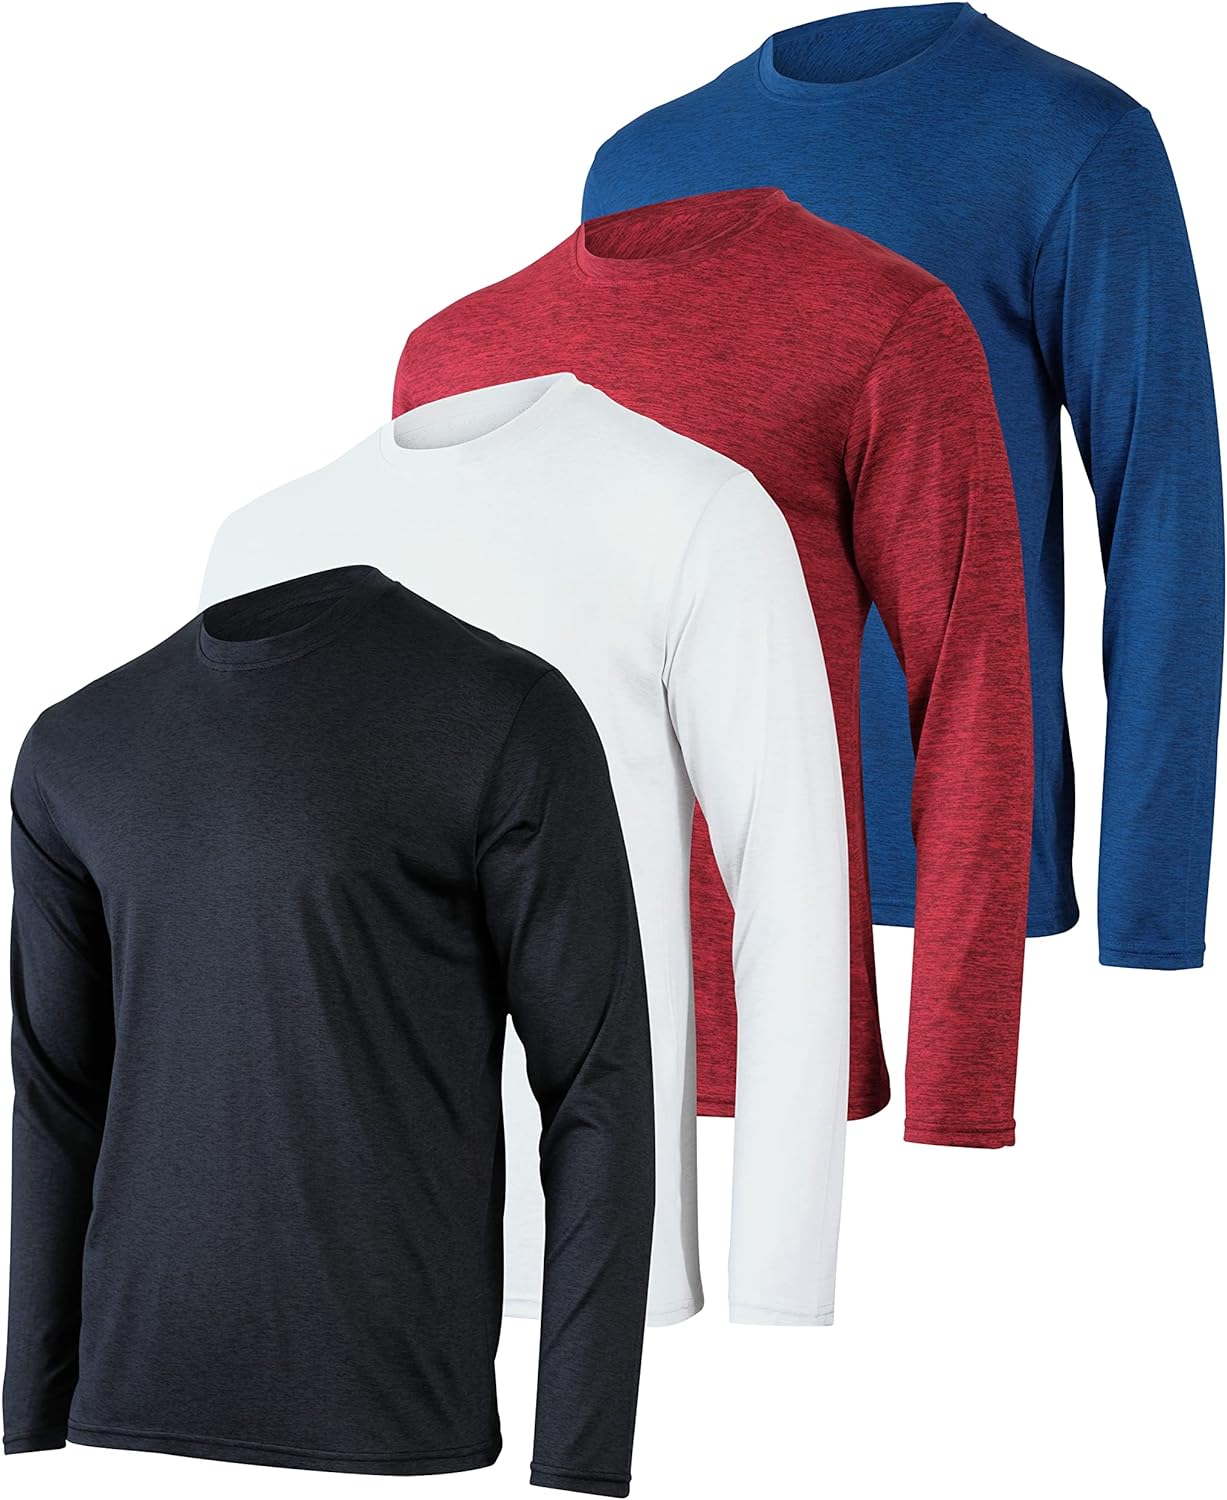 I recently purchased these shirts. They are very comfortable and fit just right. They are also lightweight, which is great for hot weather. The best part is that they were very affordable.